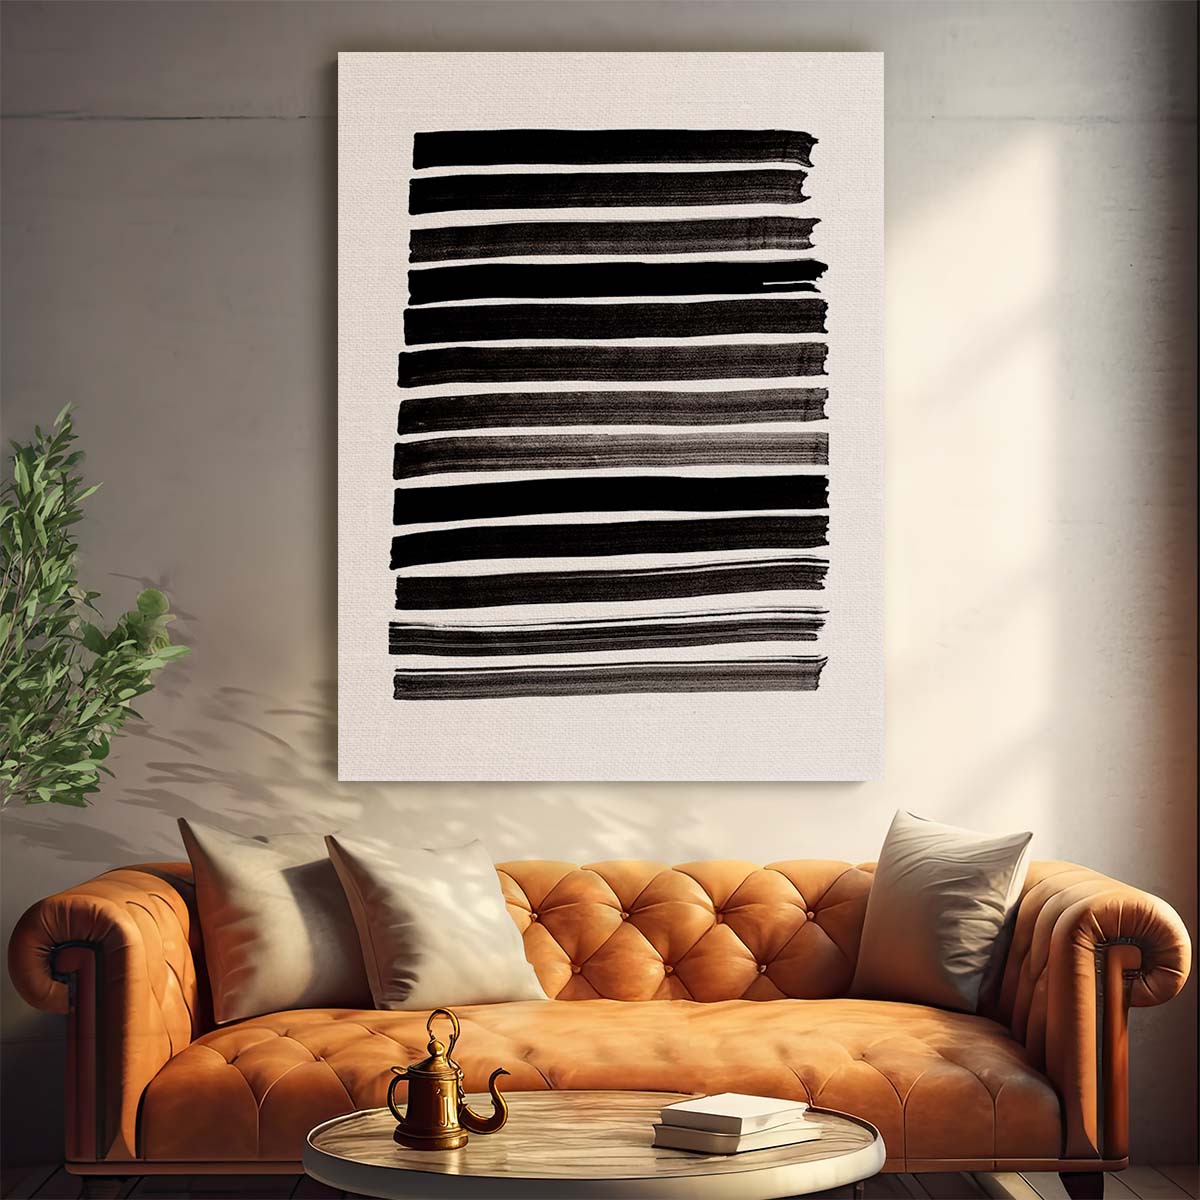 Abstract Geometric Line Art Illustration in Beige & Black Stripes by Luxuriance Designs, made in USA